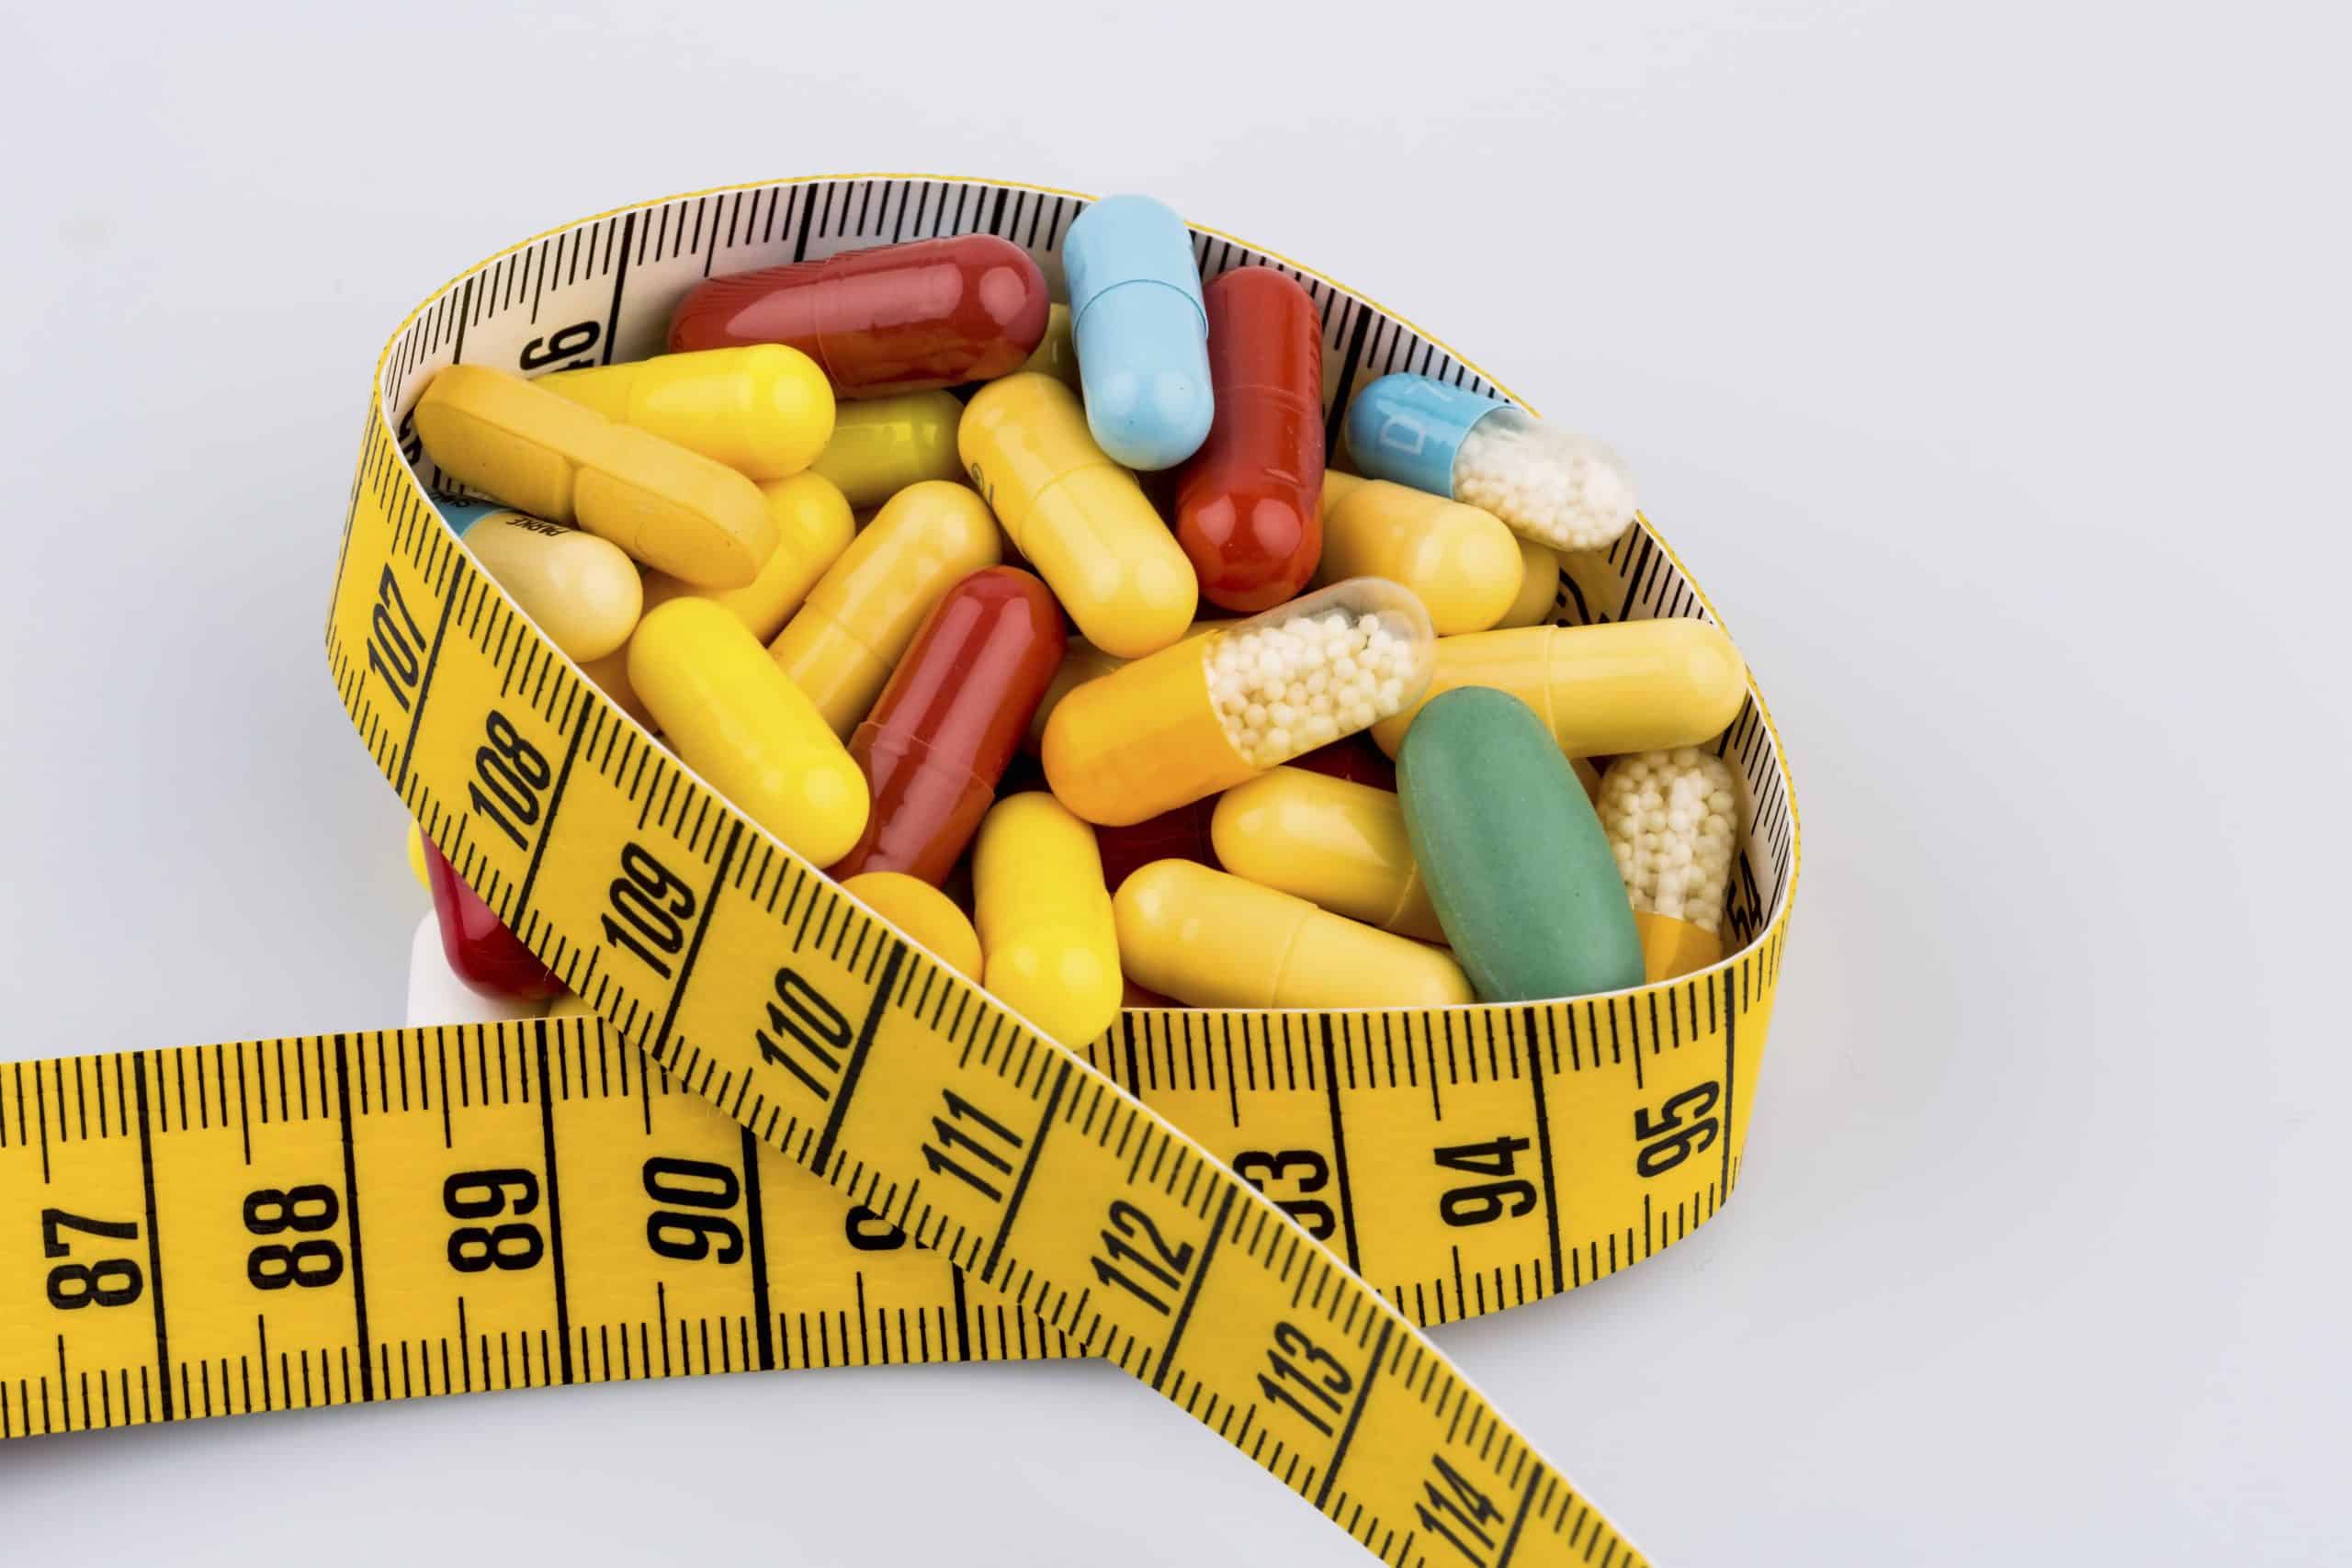 How To Get Rid Of Excessive Pounds By Taking Appetite Suppressants?